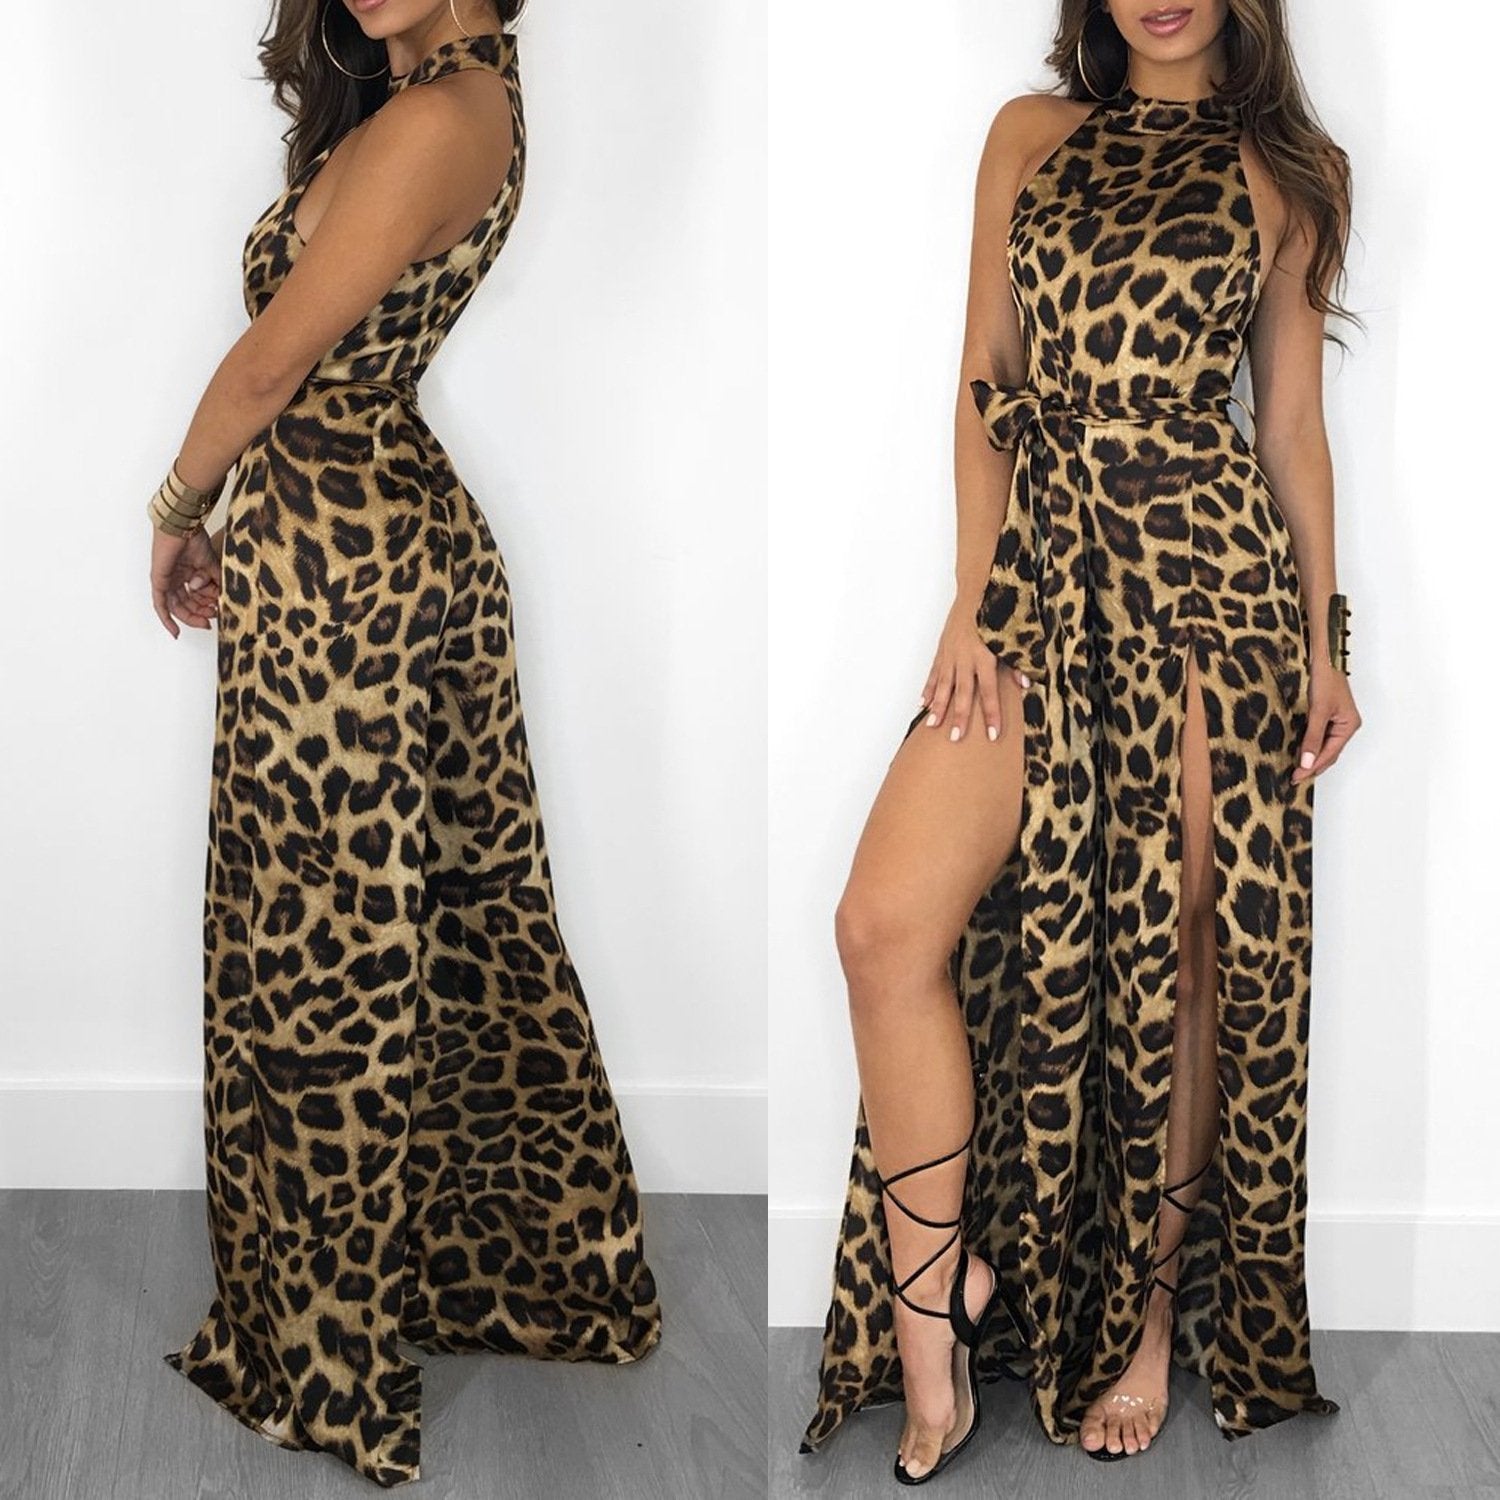 Sexy Women's Leopard Print High Waist Jumpsuits-Sexy Dresses-Free Shipping at meselling99